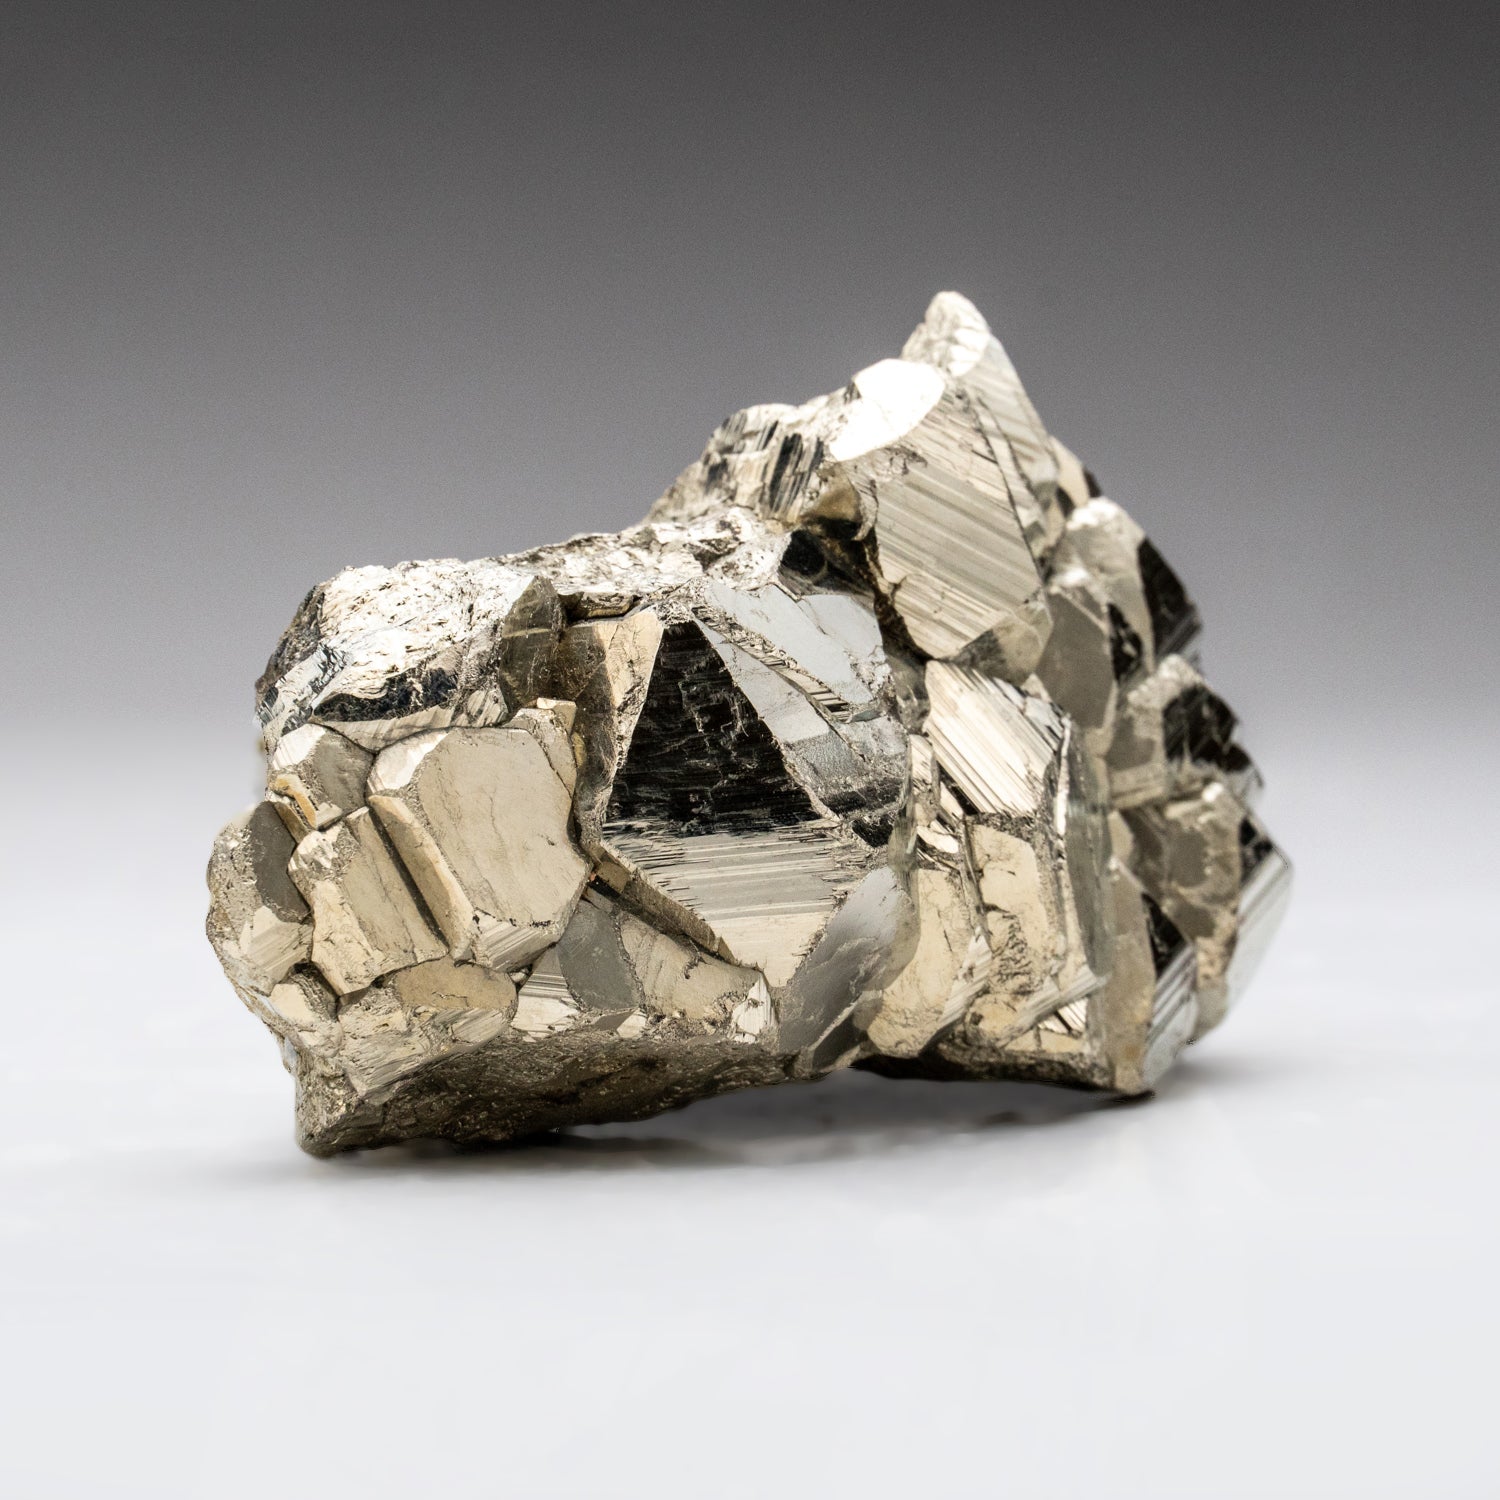 Pyrite Cluster from Huanuco Province, Peru (1.7 lbs)